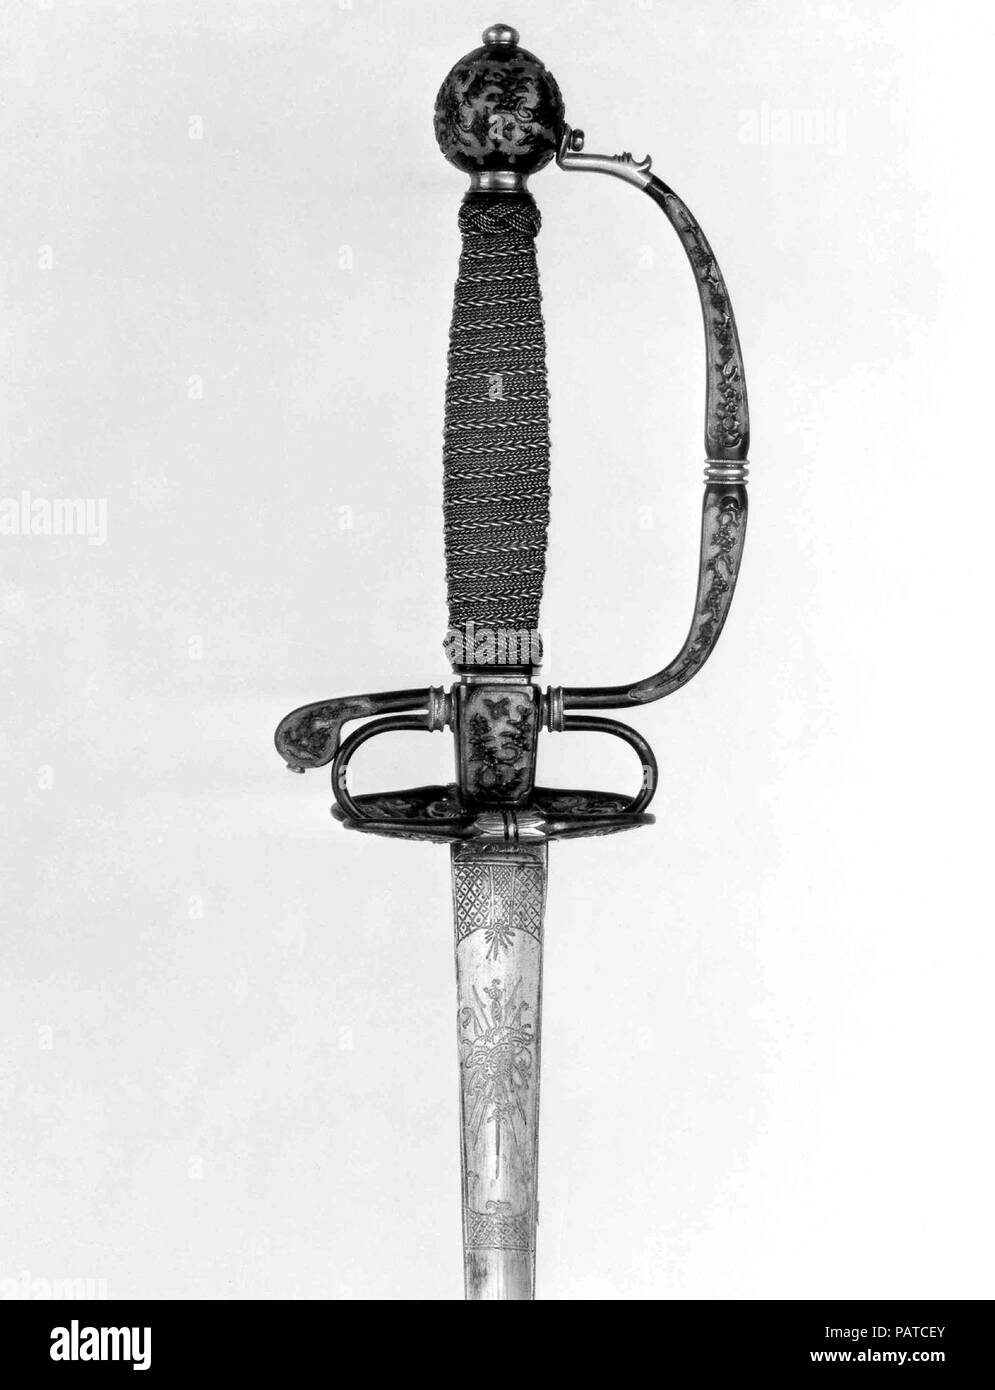 Smallsword Hilt and Blade. Culture: hilt, Japanese, possibly Dejima; blade, European. Dimensions: Hilt (a); L. approx. 7 in. (17.8 cm); W. approx. 4 in. (10.2 cm); Wt. 5.3 oz. (150.3 g); blade (b); L. 40 1/8 in. (101.9 cm); Wt. 5.5 oz. (155.9 g). Date: ca. 1730.  Sword hilts of European fashion made of shakudo, an alloy of copper and gold patinated to the blue-black color that was used in Japan for small decorative objects such as sword mountings, were probably fabricated for the Dutch East India Company at their trading post on the Japanese island of Deshima. Hilt elements like these were the Stock Photo